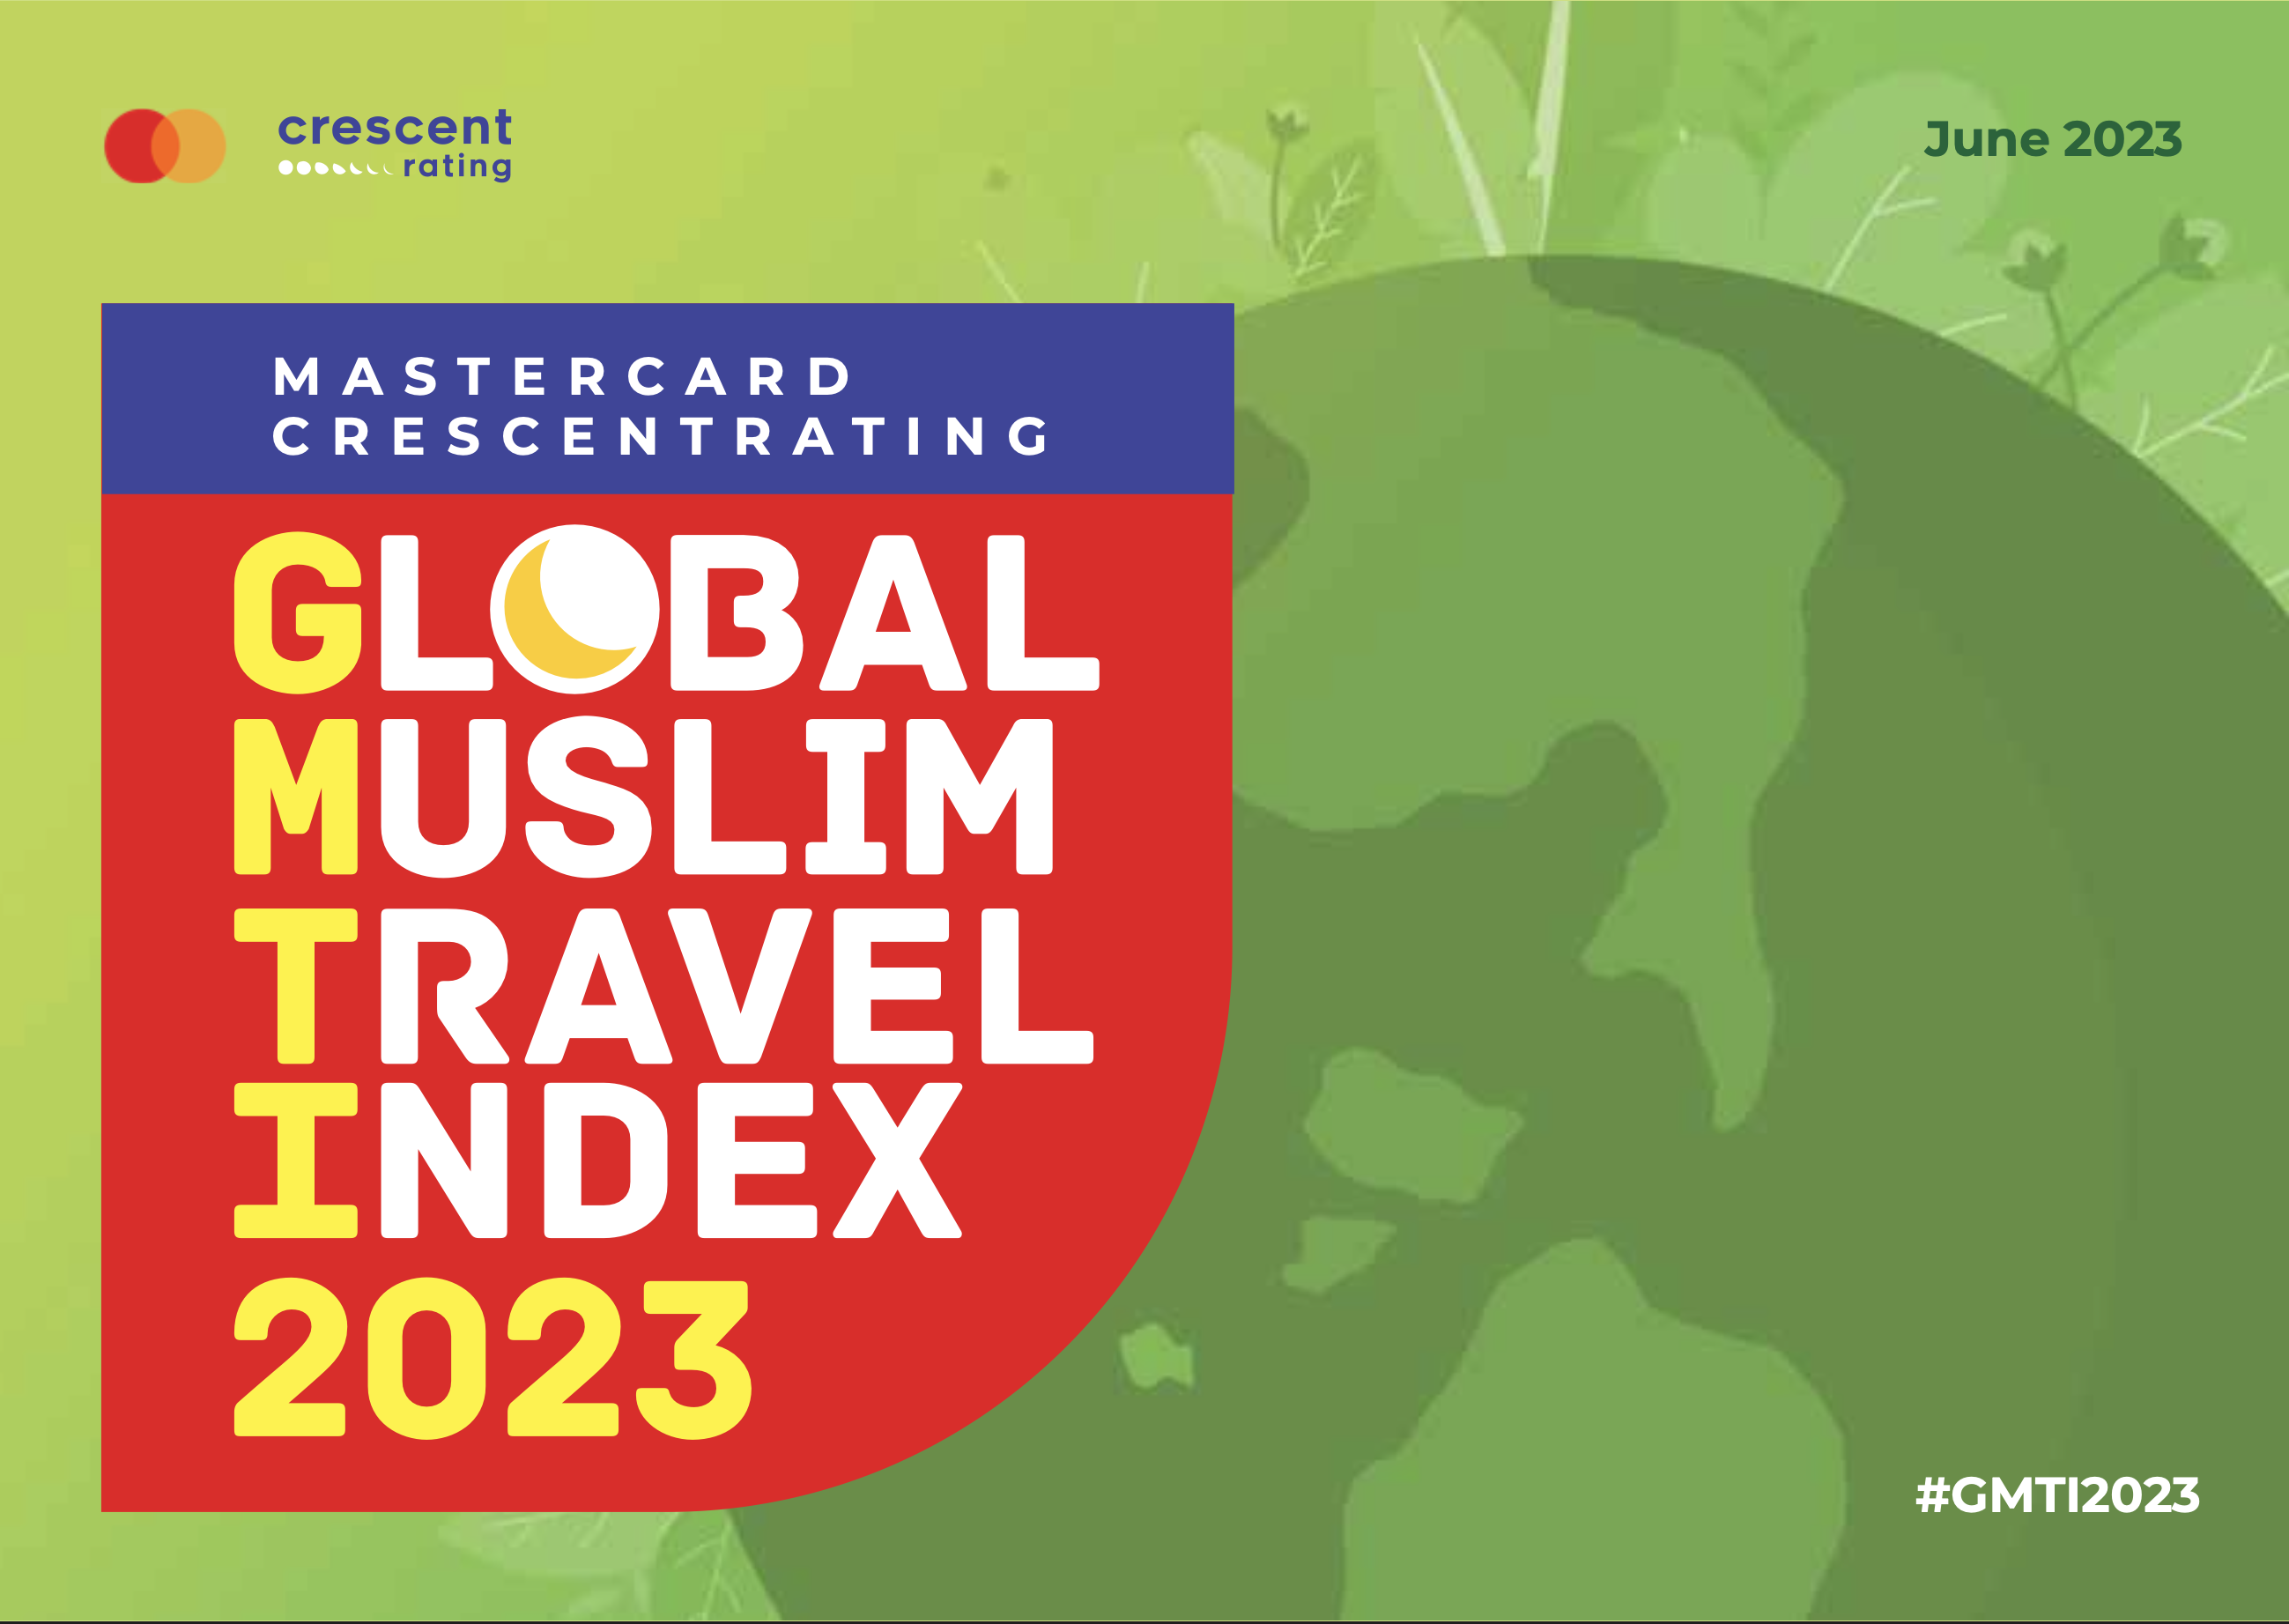 Indonesia and Malaysia the top destinations for Muslim travelers: Mastercard-CrescentRating Global Muslim Travel Index 2023